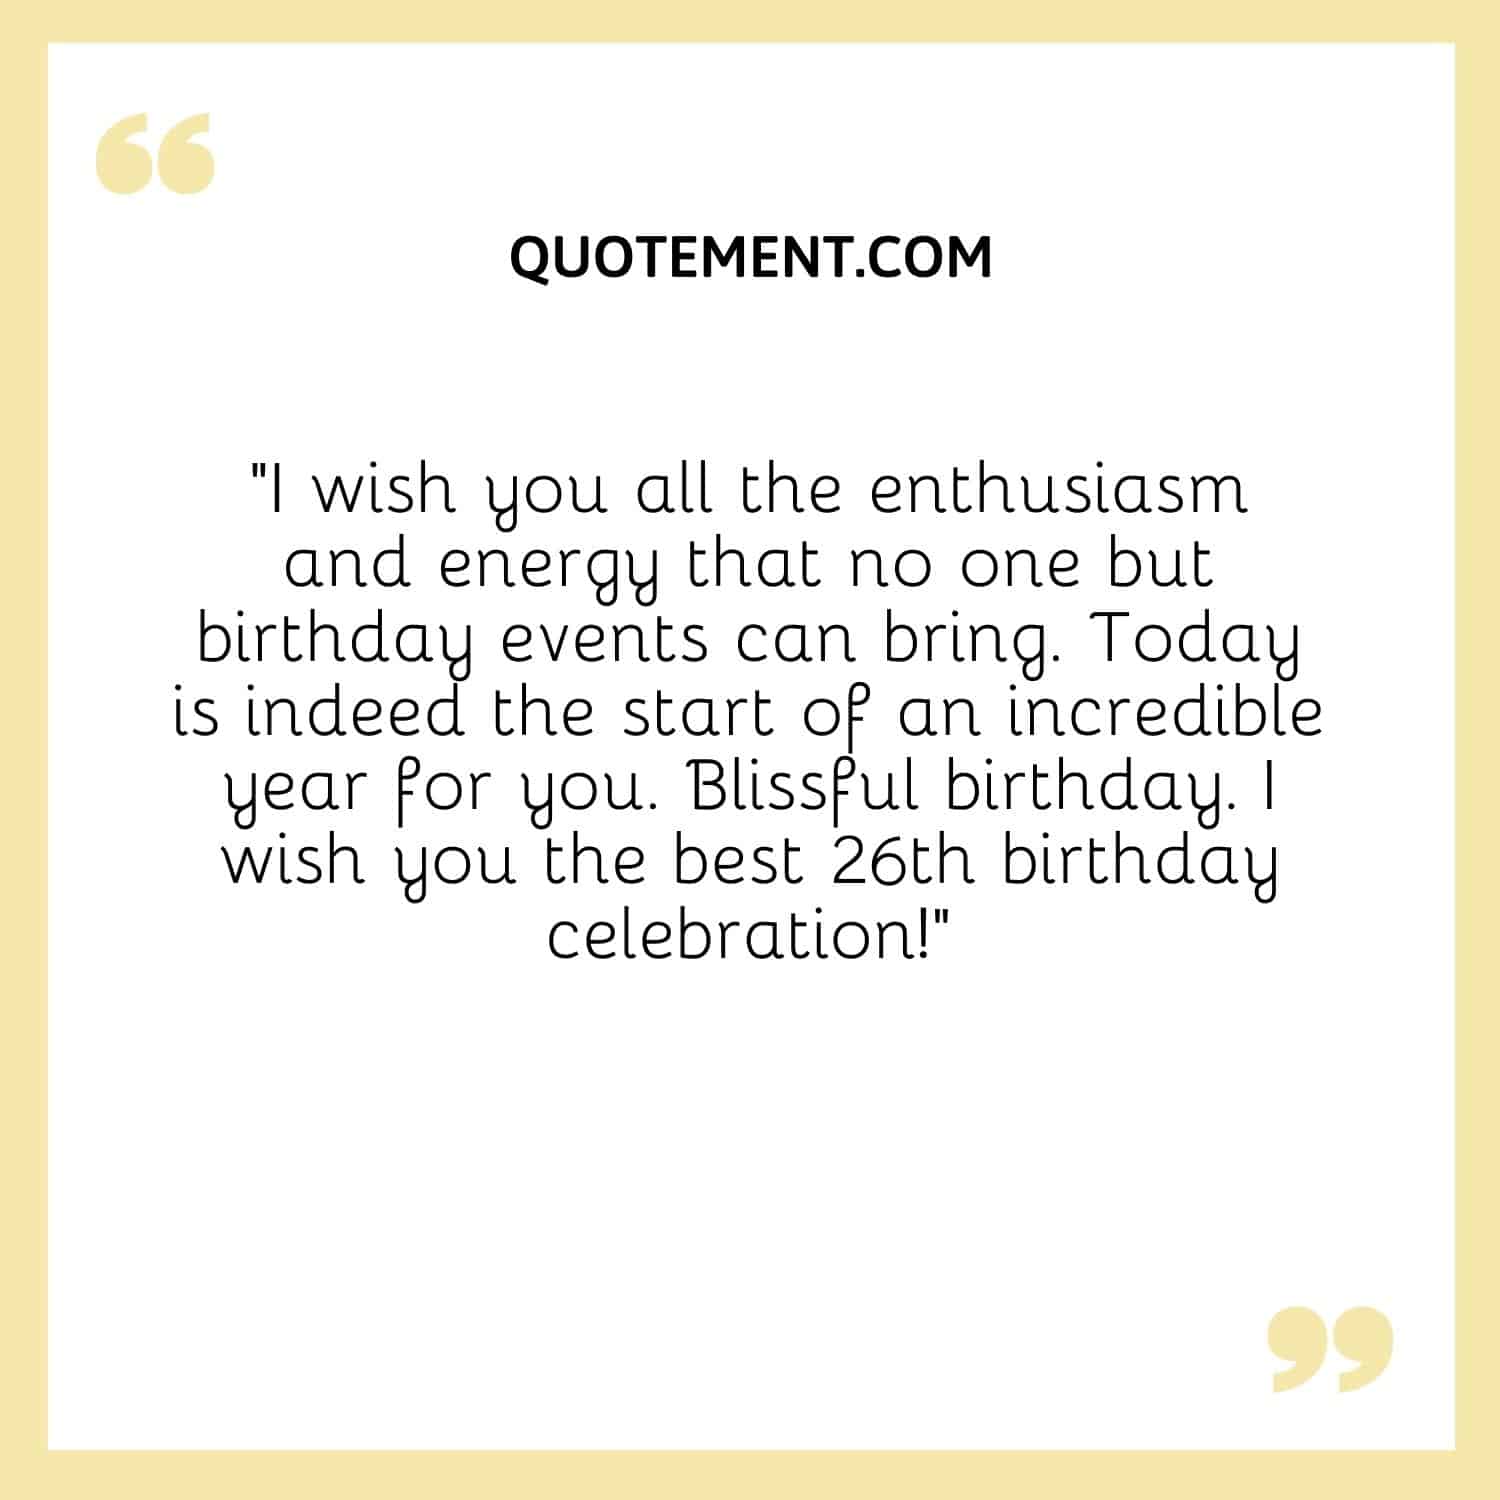 I wish you all the enthusiasm and energy that no one but birthday events can bring.